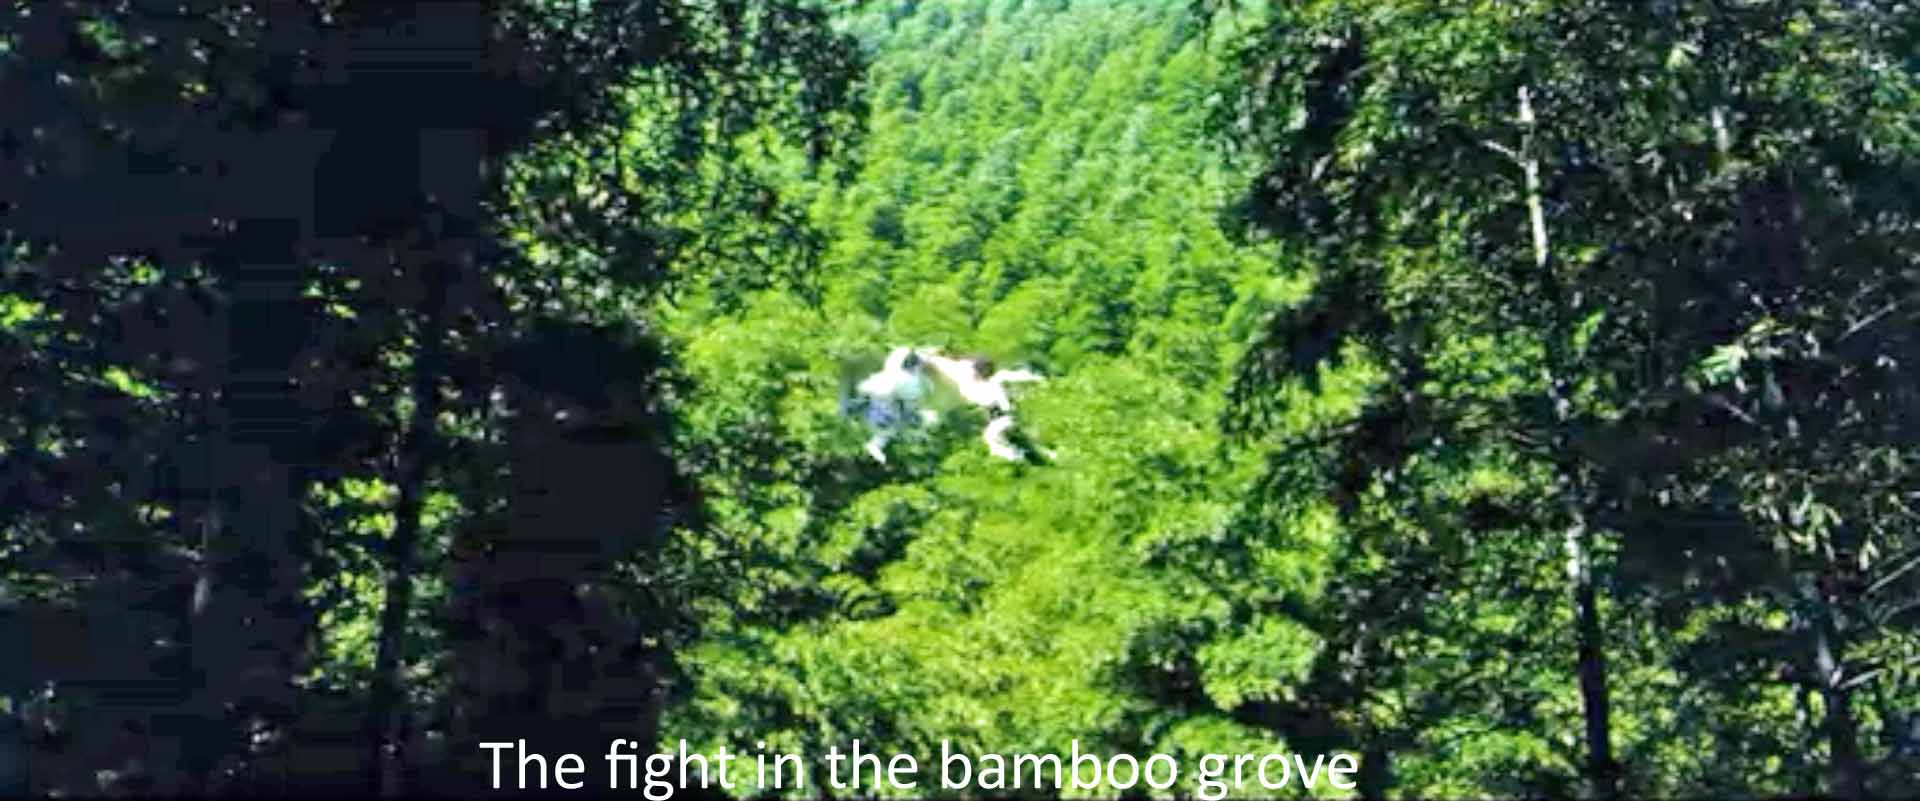 The fight in the bamboo grove